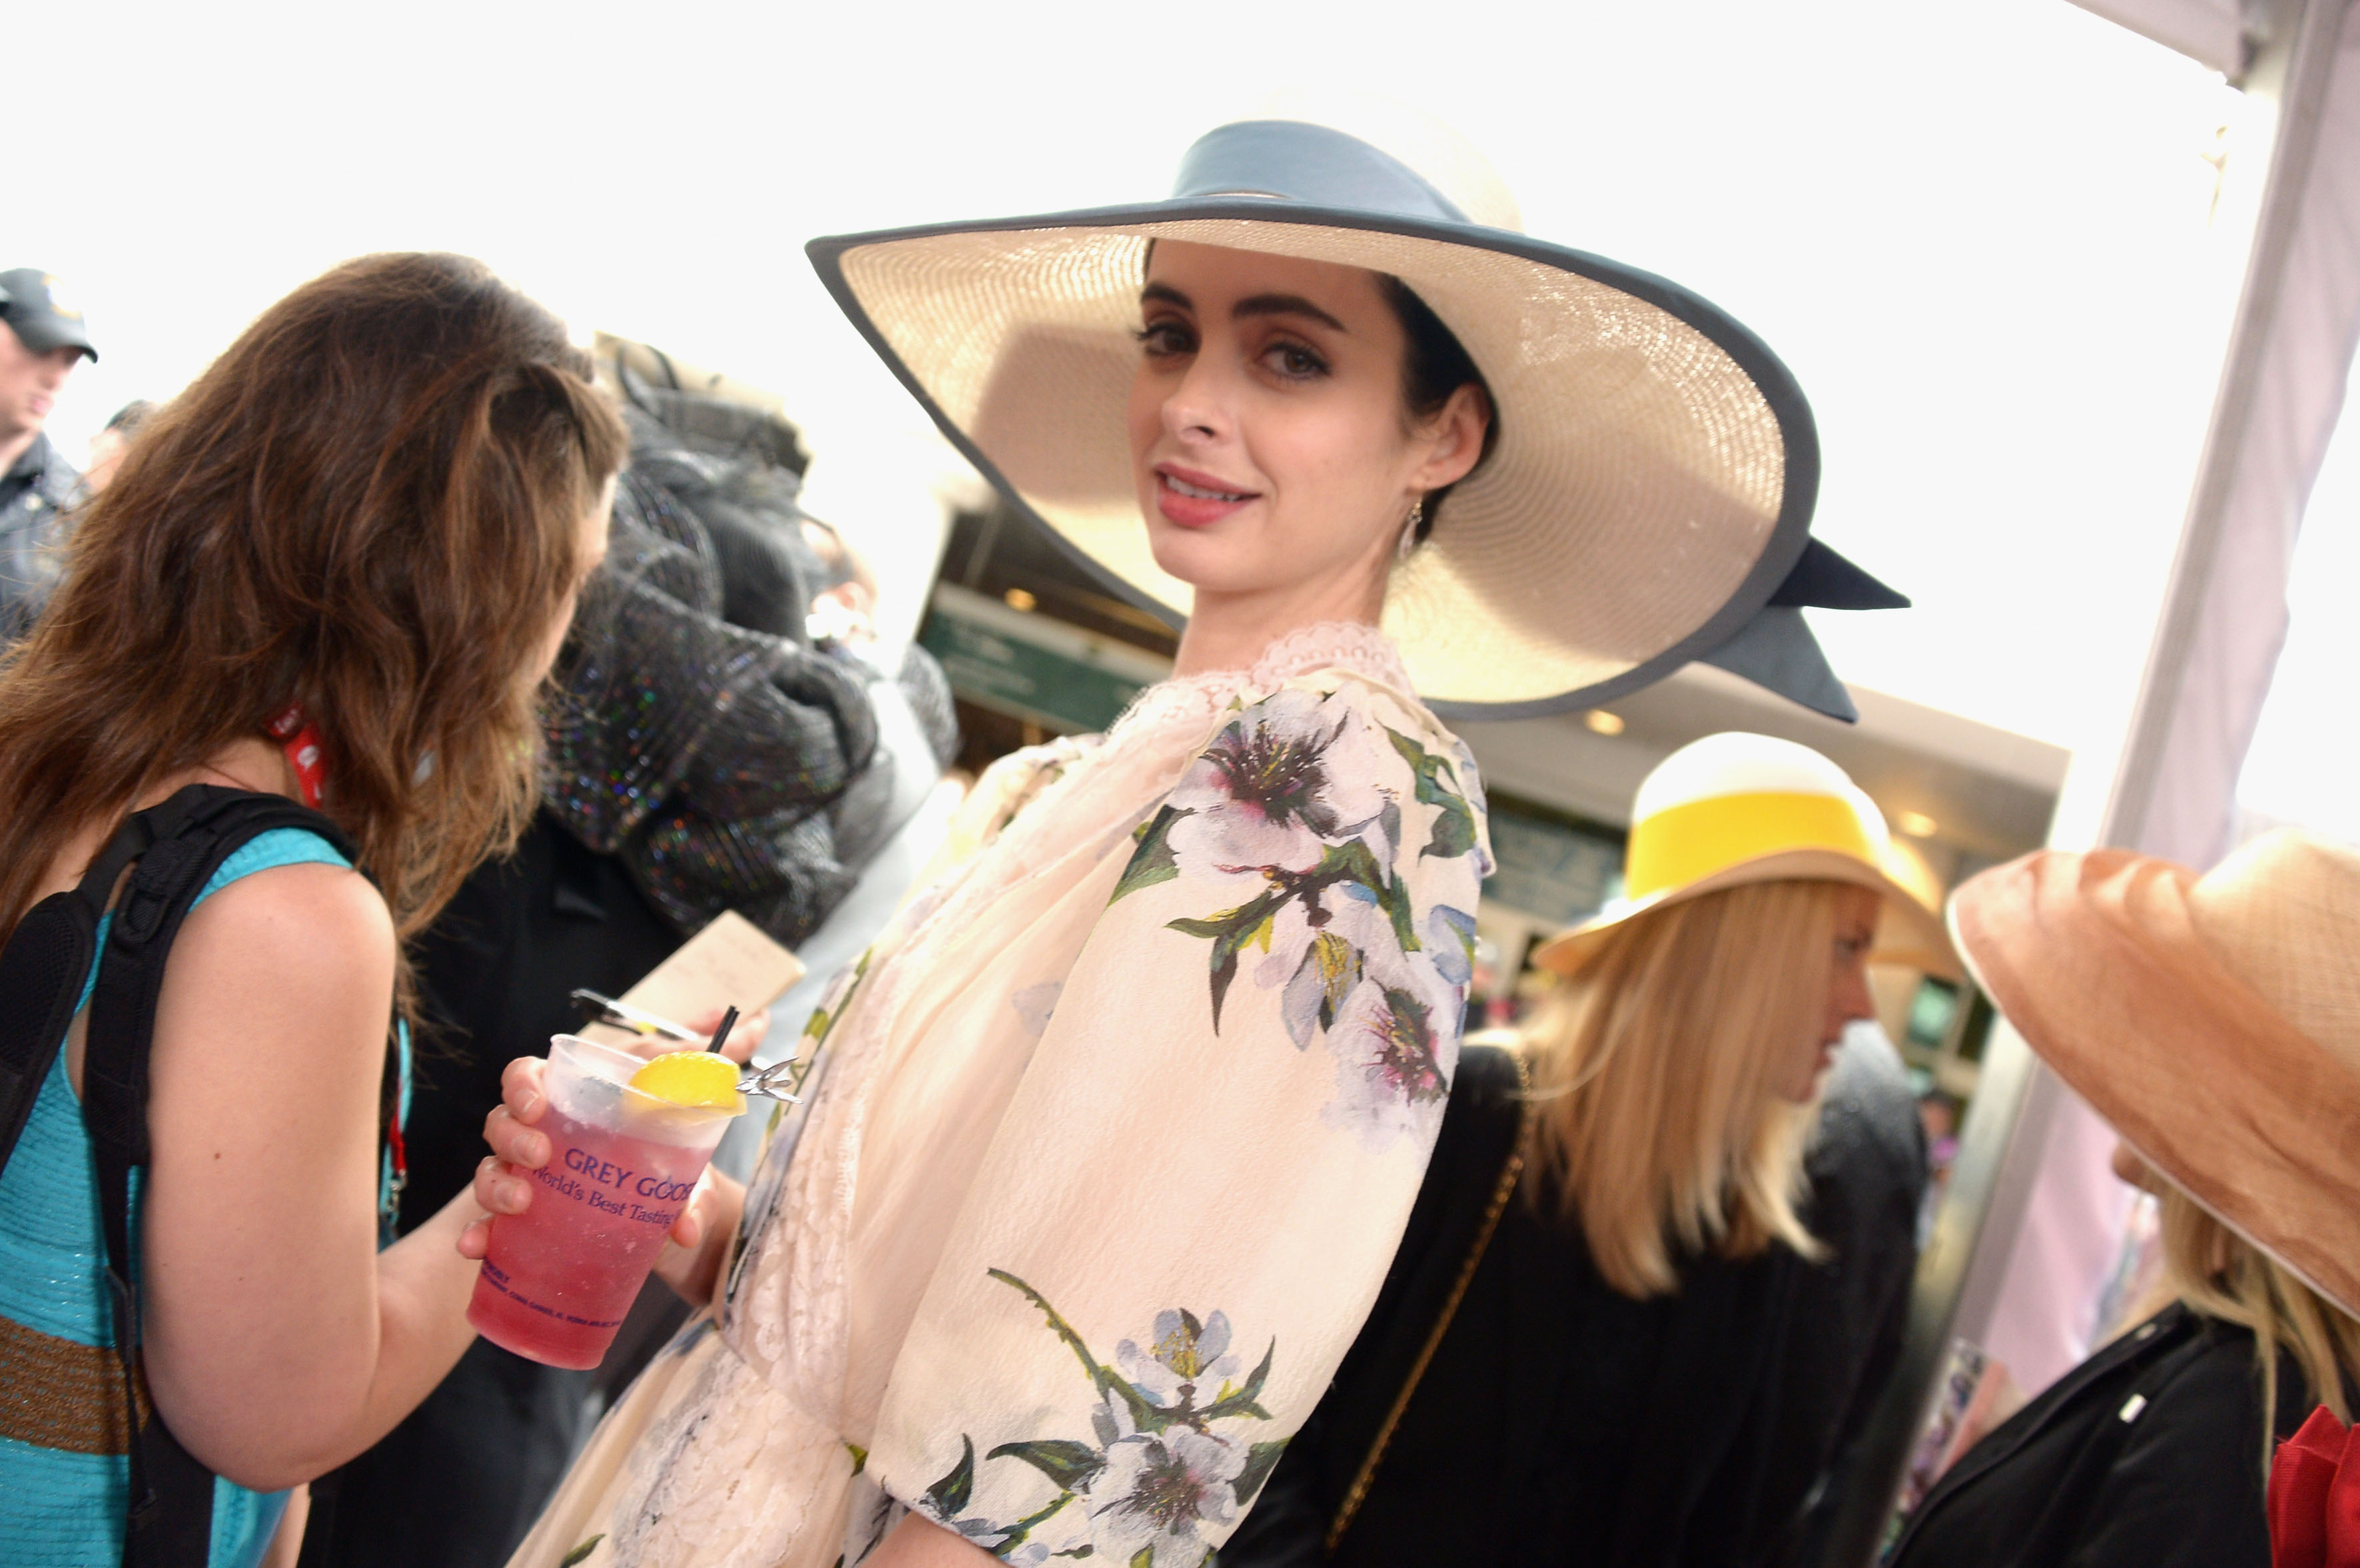 LOUISVILLE, KY - MAY 04:  Krysten Ritter at the GREY GOOSE Red Carpet Lounge at the Kentucky Derby at Churchill Downs on May 4, 2013 in Louisville, Kentucky.  (Photo by Theo Wargo/Getty Images for GREY GOOSE)